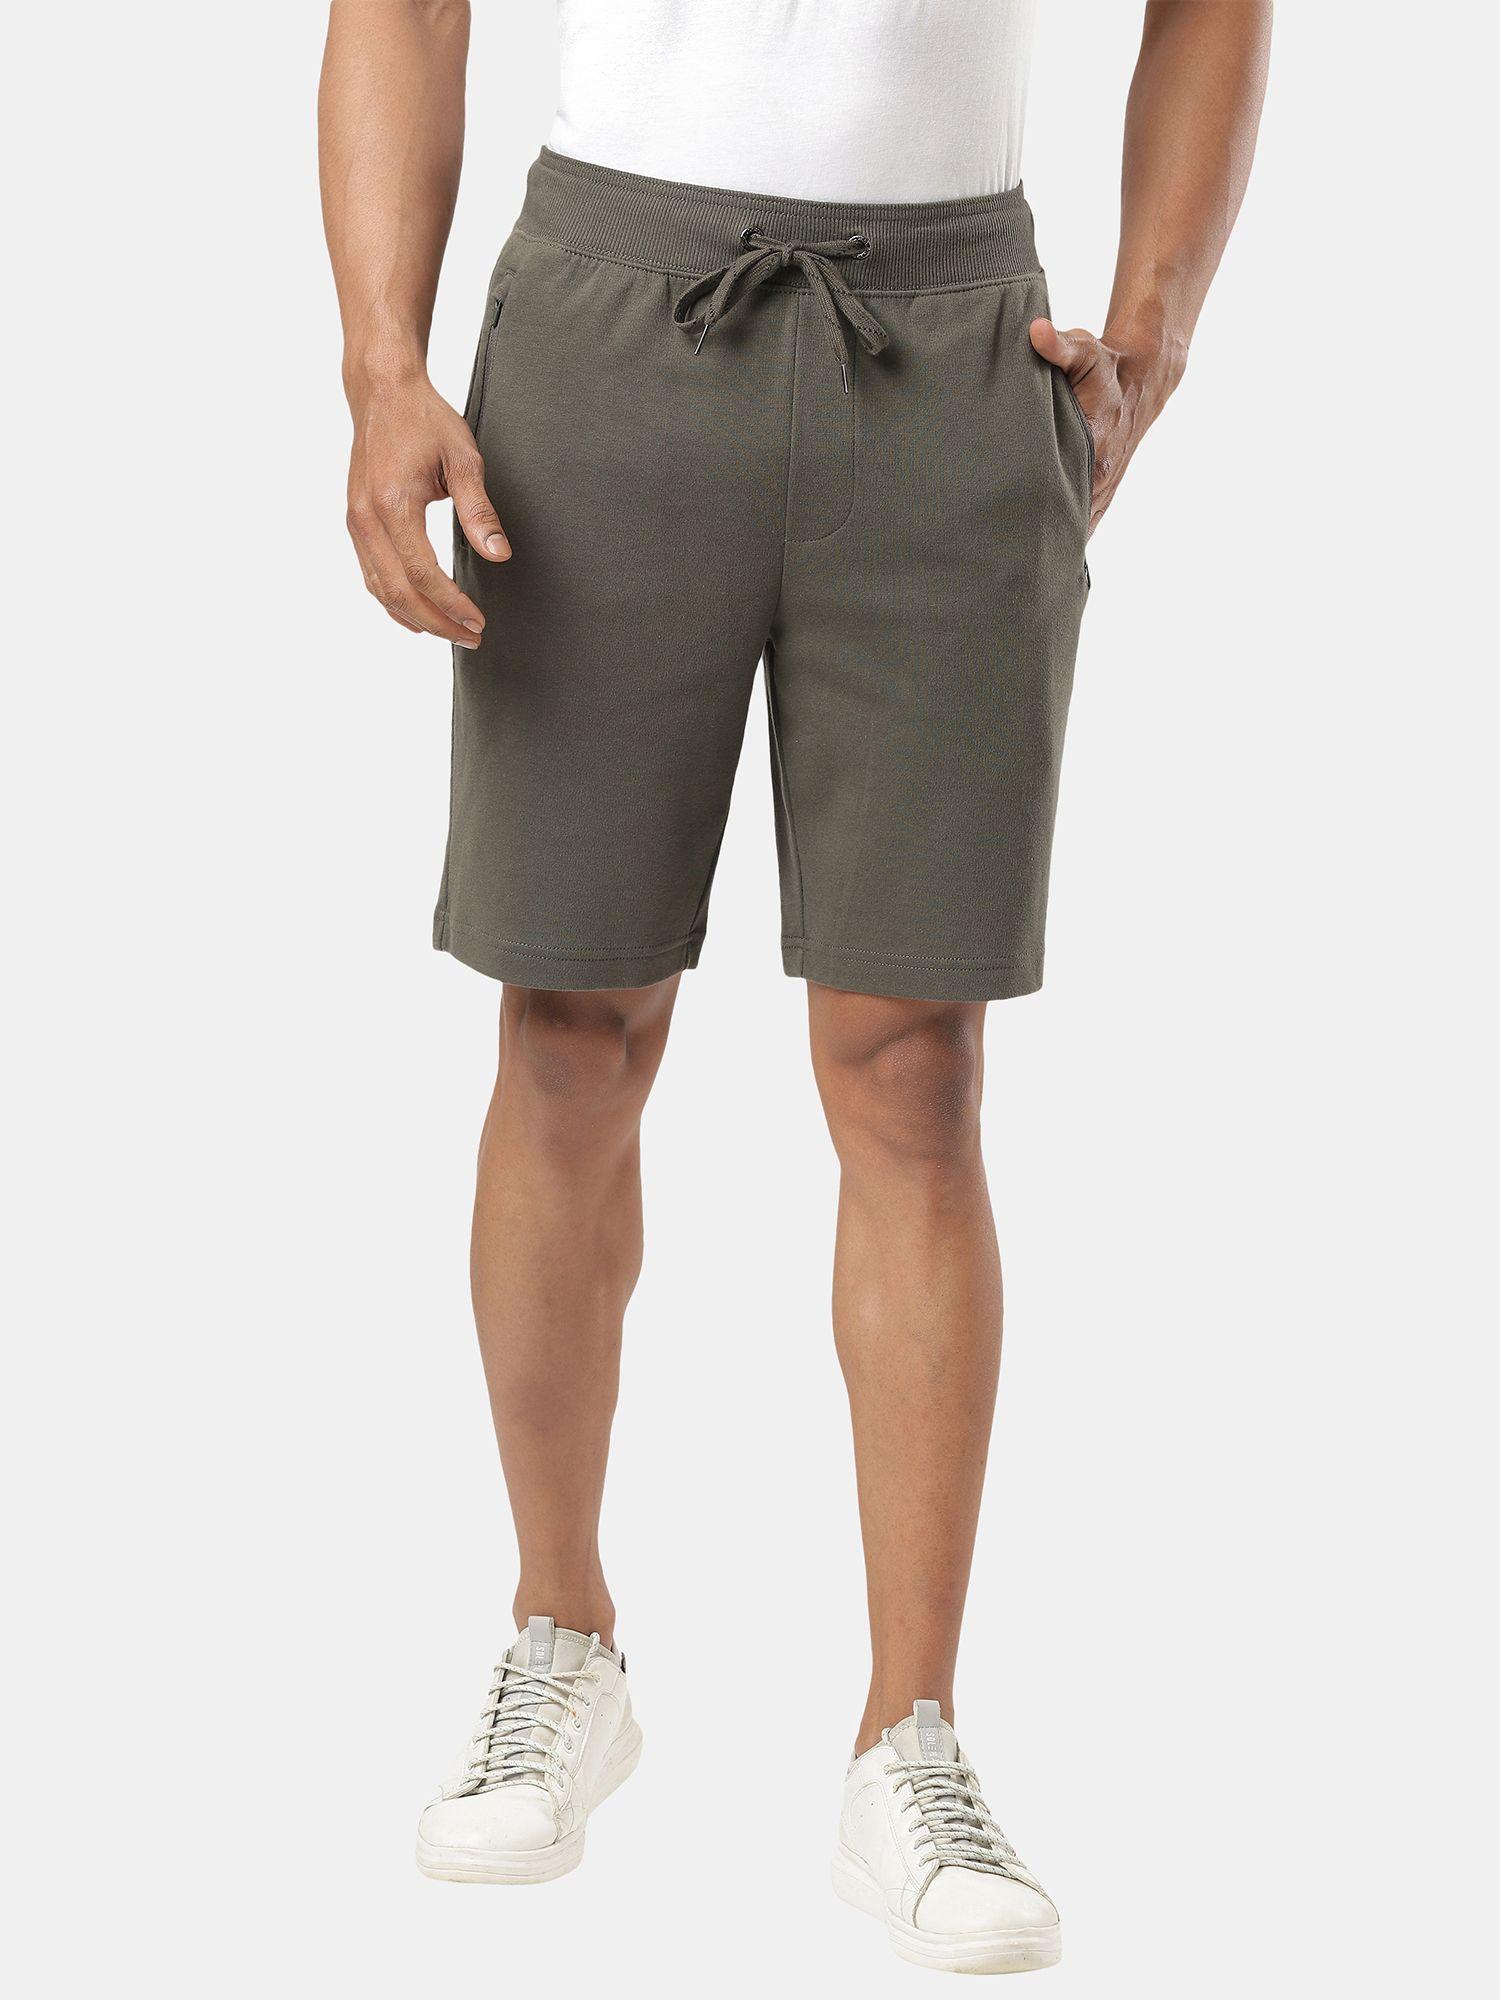 am14-men's-super-combed-cotton-rich-straight-fit-shorts-with-zipper-pockets---deep-olive